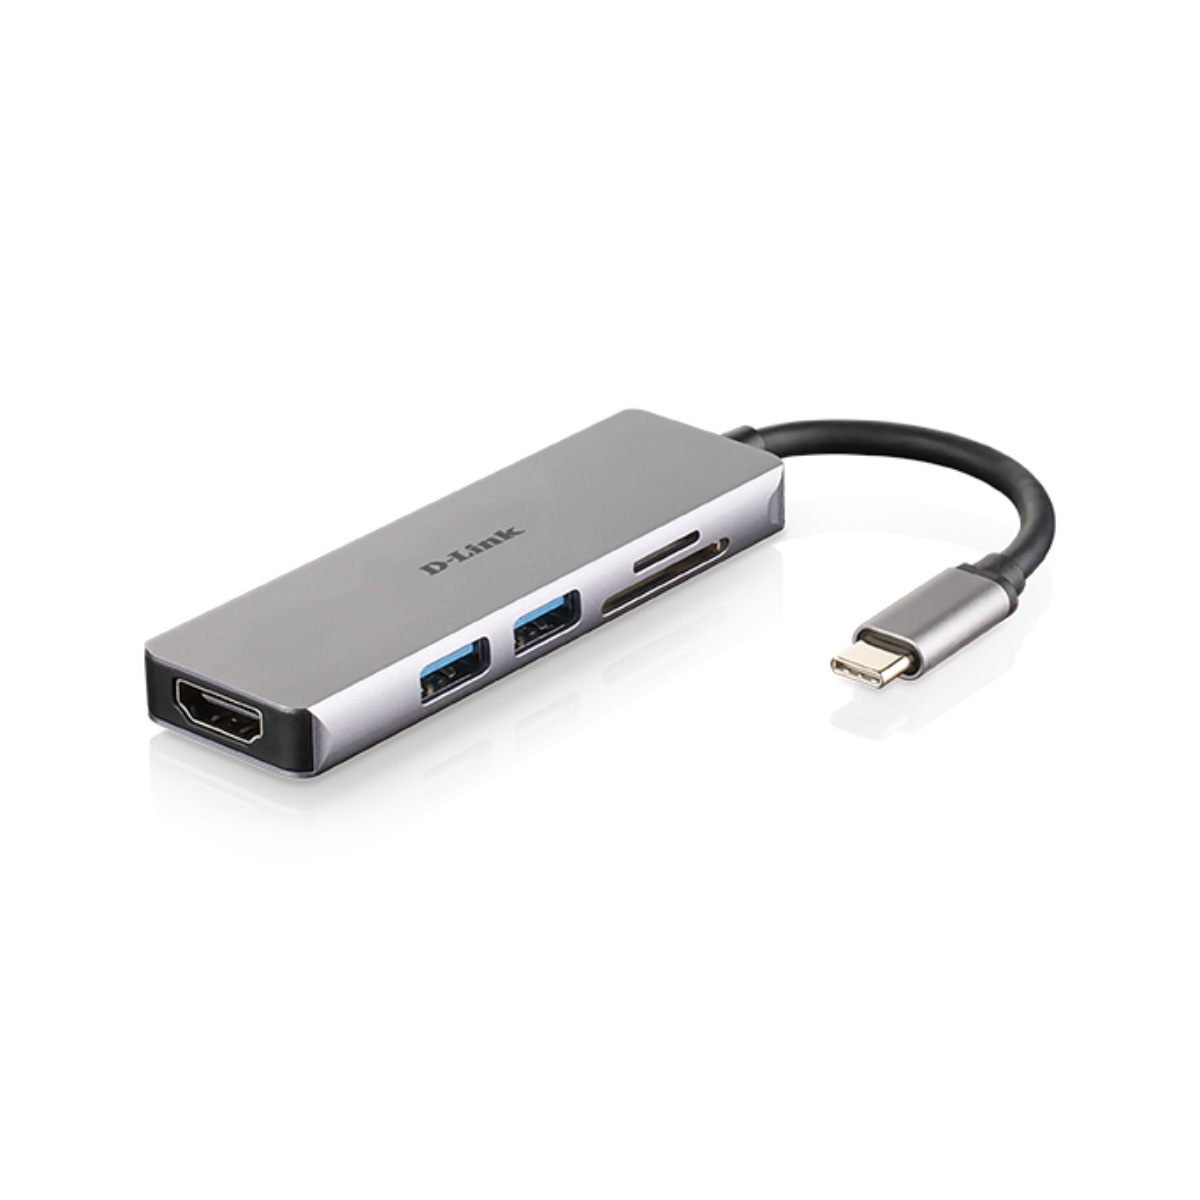 5-in-1 USB-C Hub with HDMI and SD/microSD Card Reader | DUB-M530